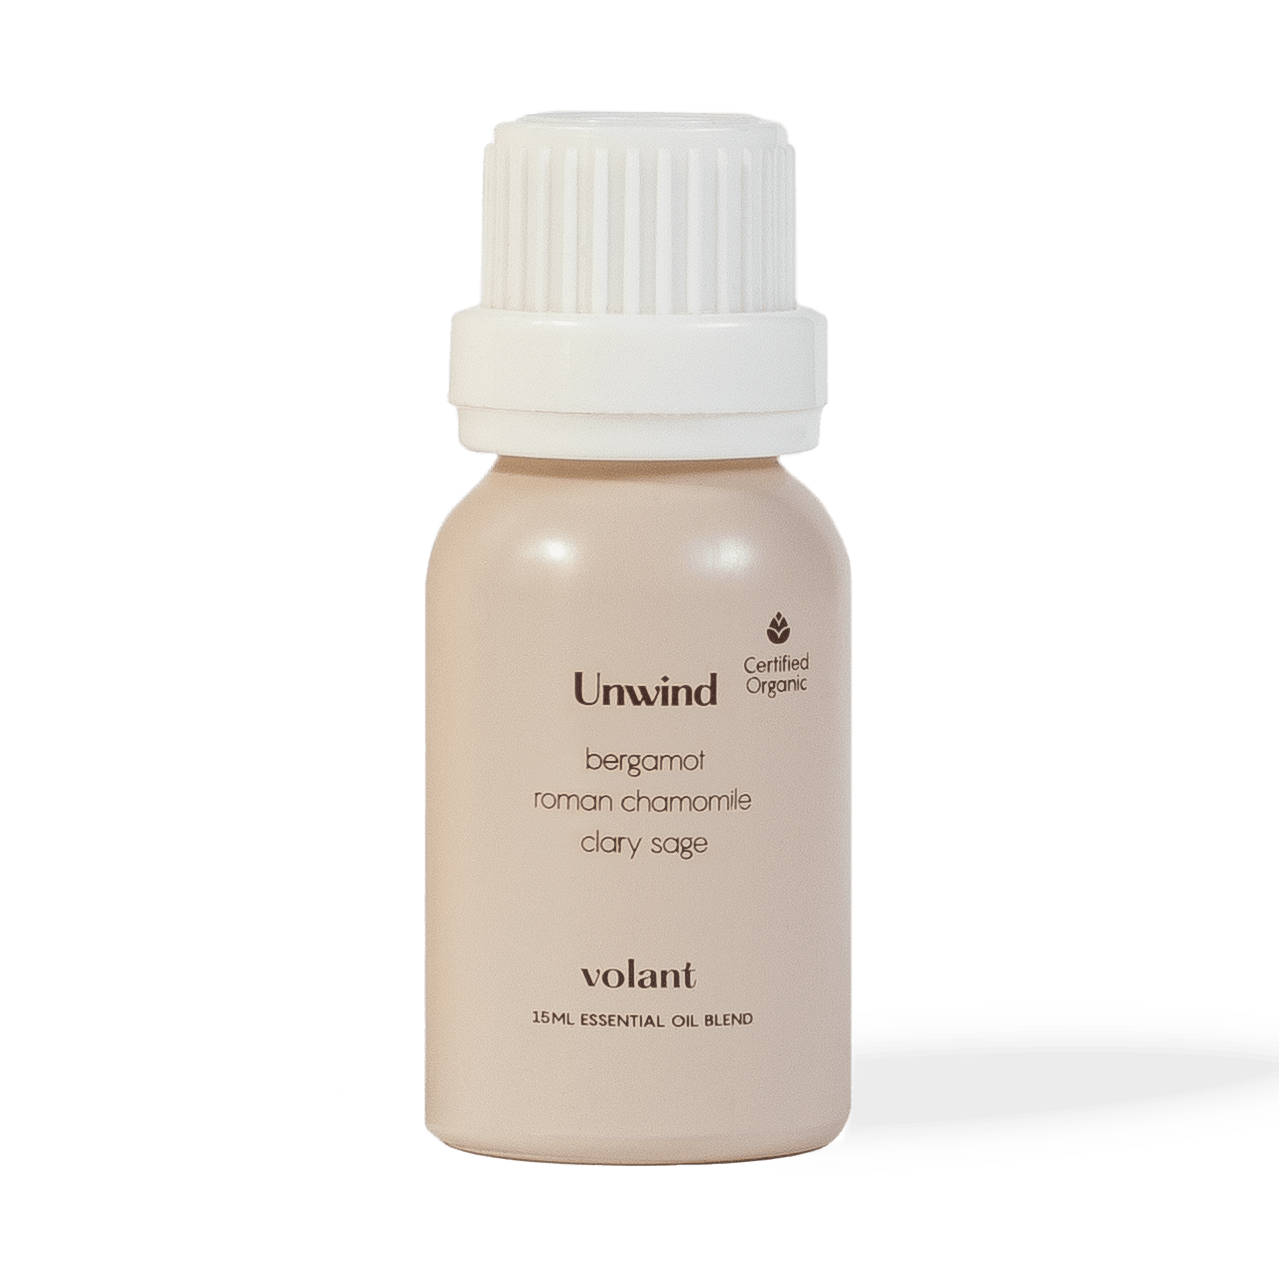 volant unwind essential oil blend bottle. This is a mix of Clary Sage, Roman Chamomile, and Bergamot is perfect for the end of a busy stressful day.